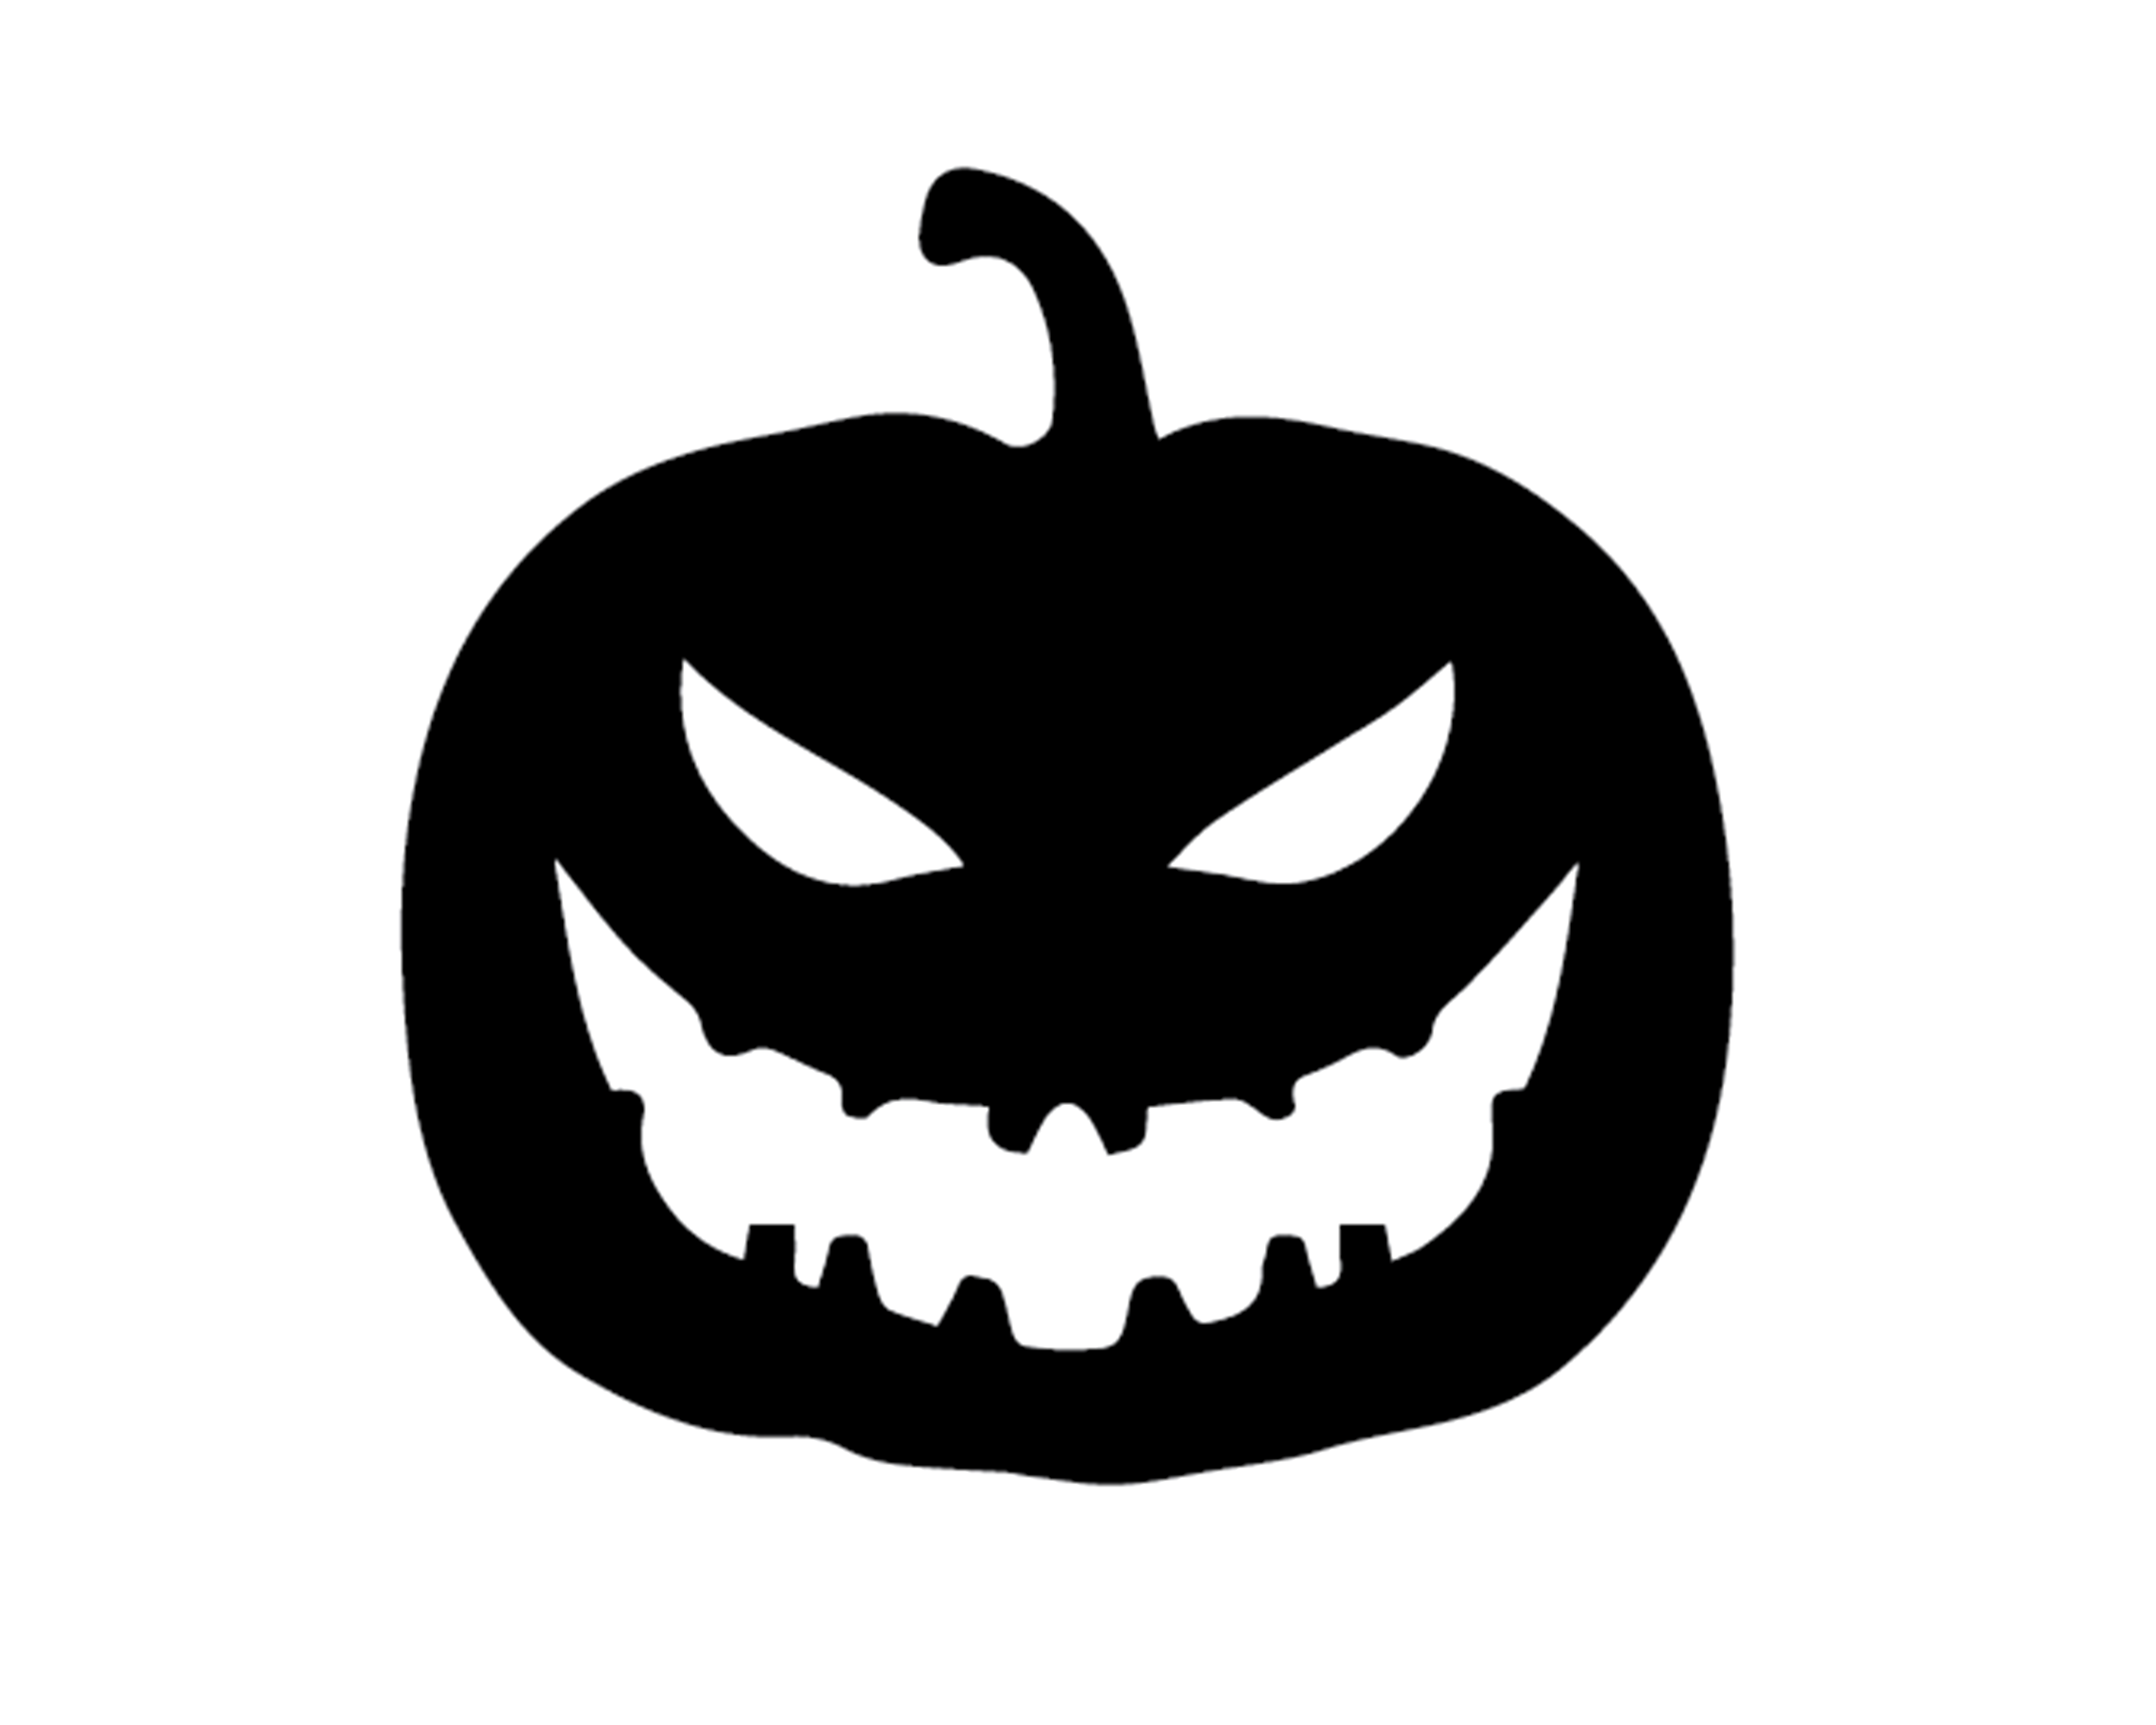 HALLOWEEN PUMPKIN VINYL PAINTING STENCIL SIZE PACK *HIGH QUALITY* – ONE15